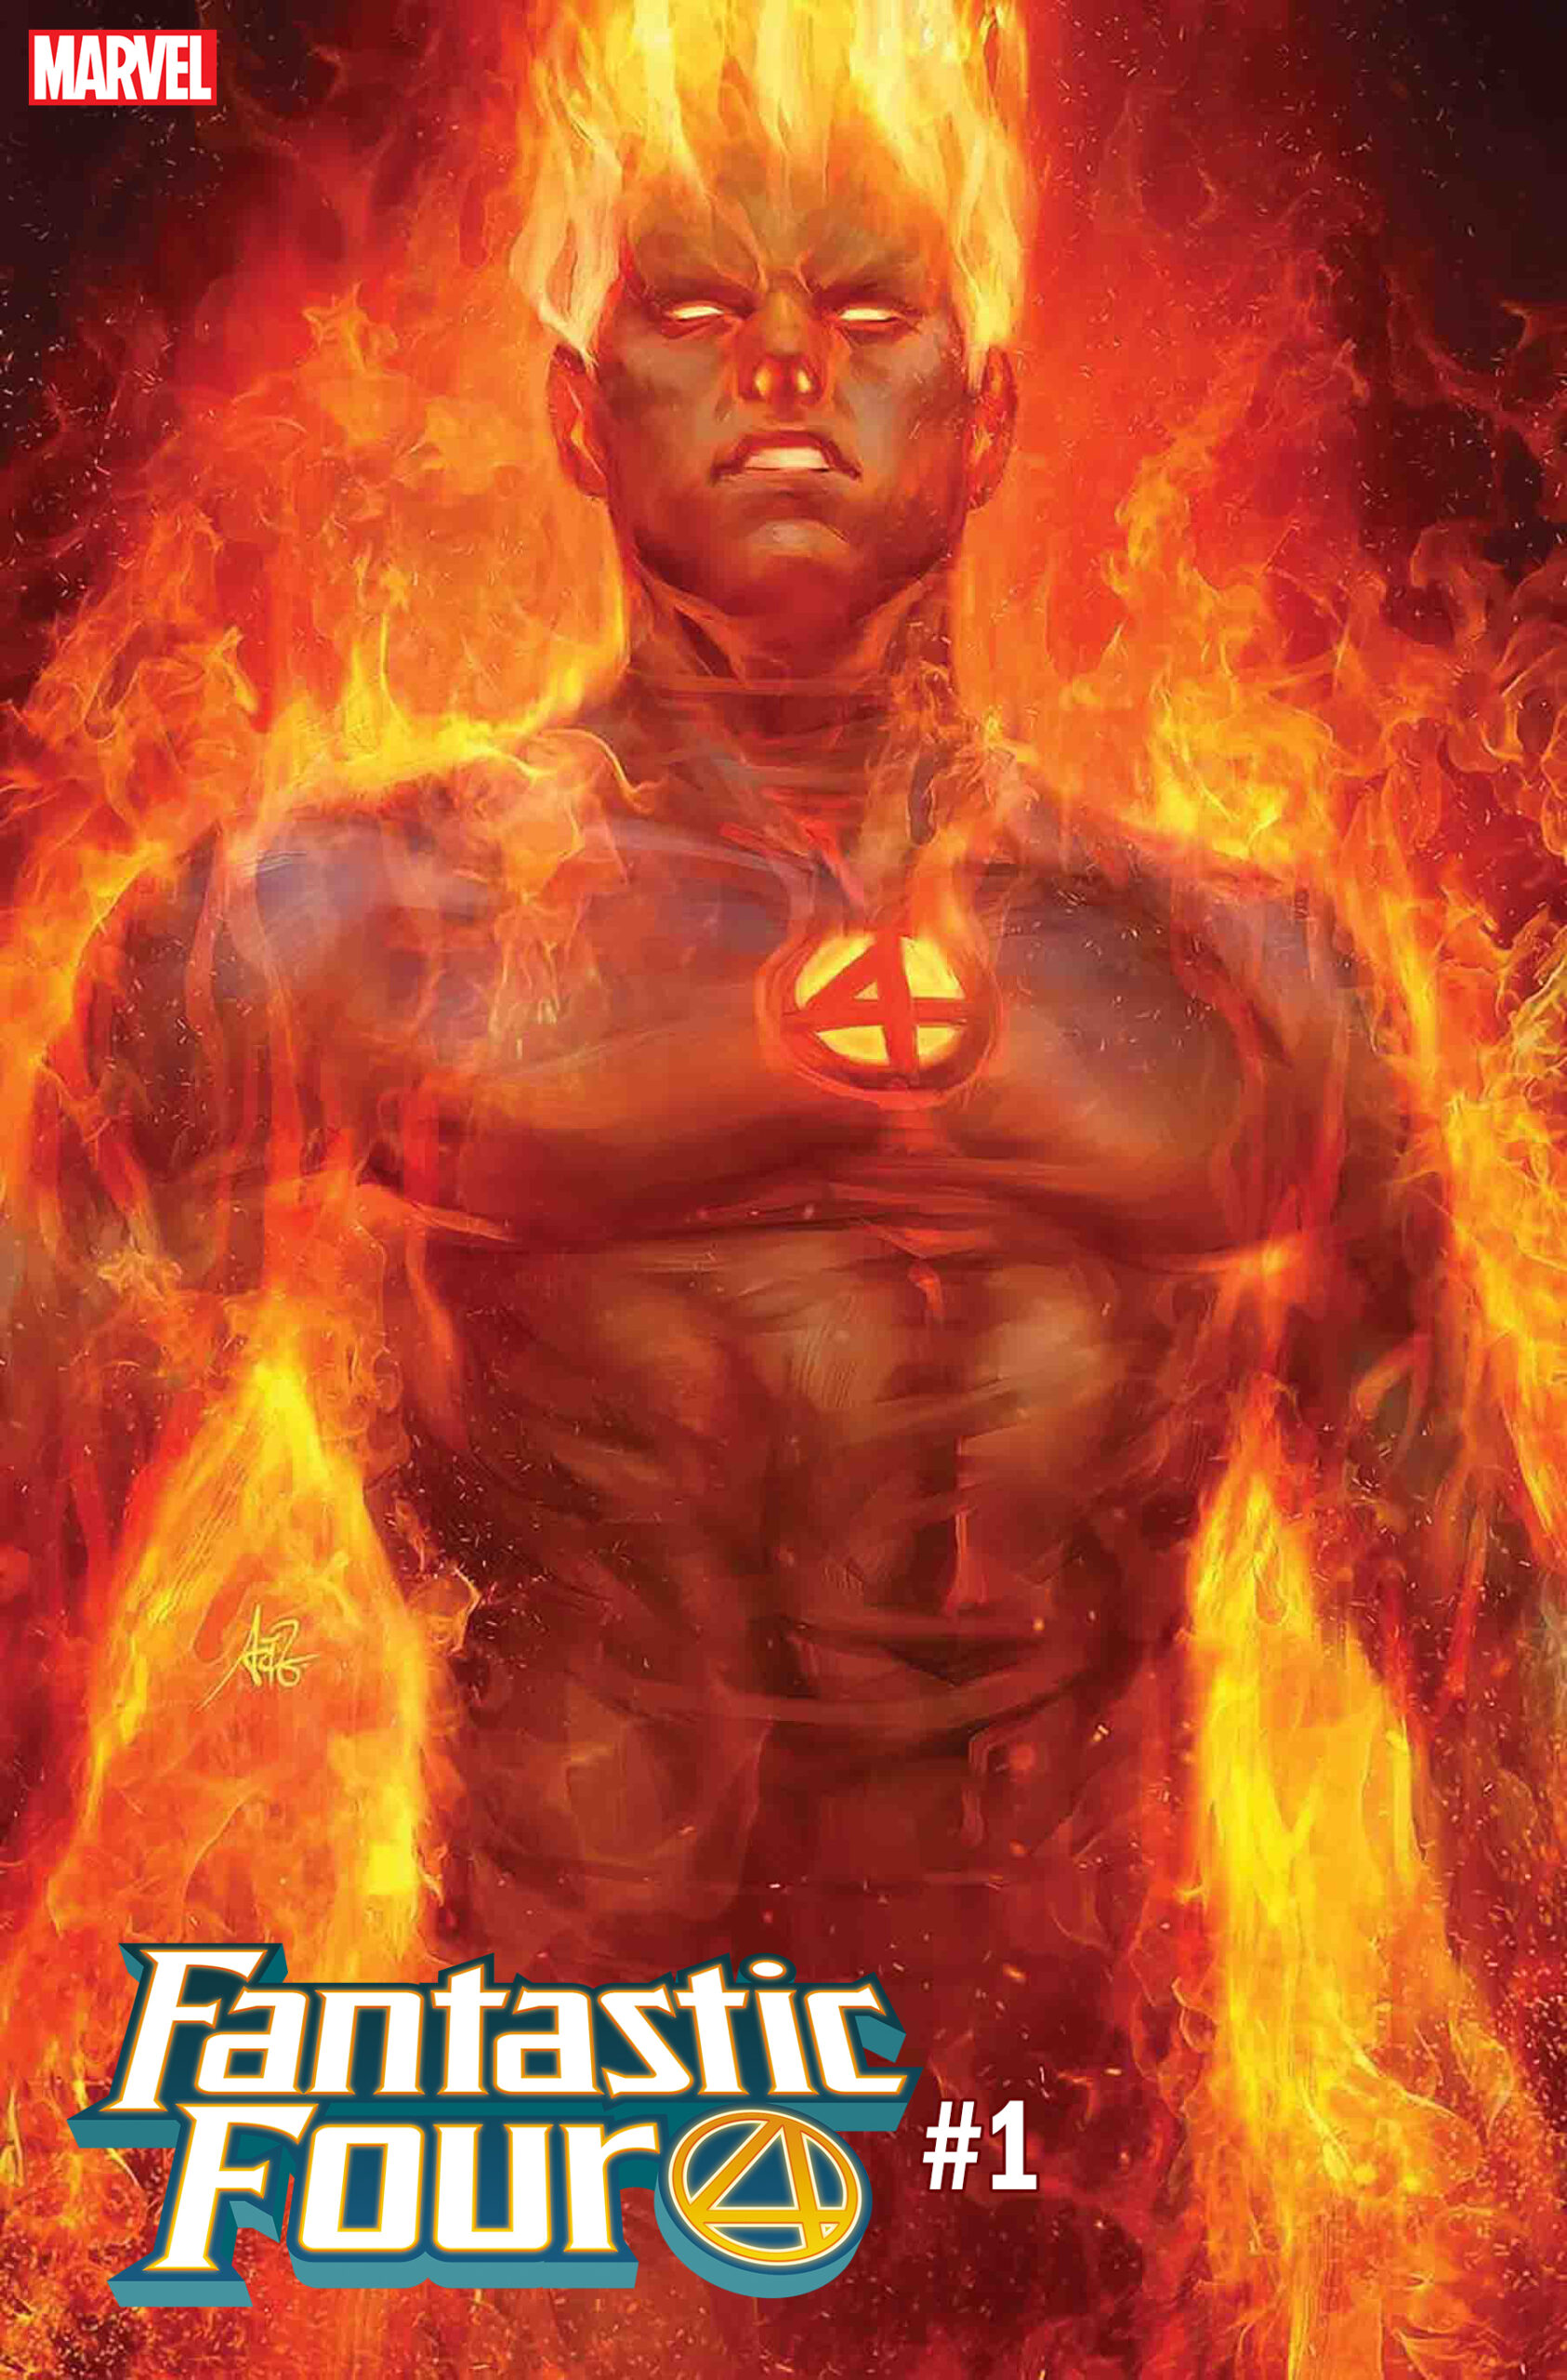 Introducing the FANTASTIC FOUR #1 Artgerm Covers! – FIRST COMICS NEWS